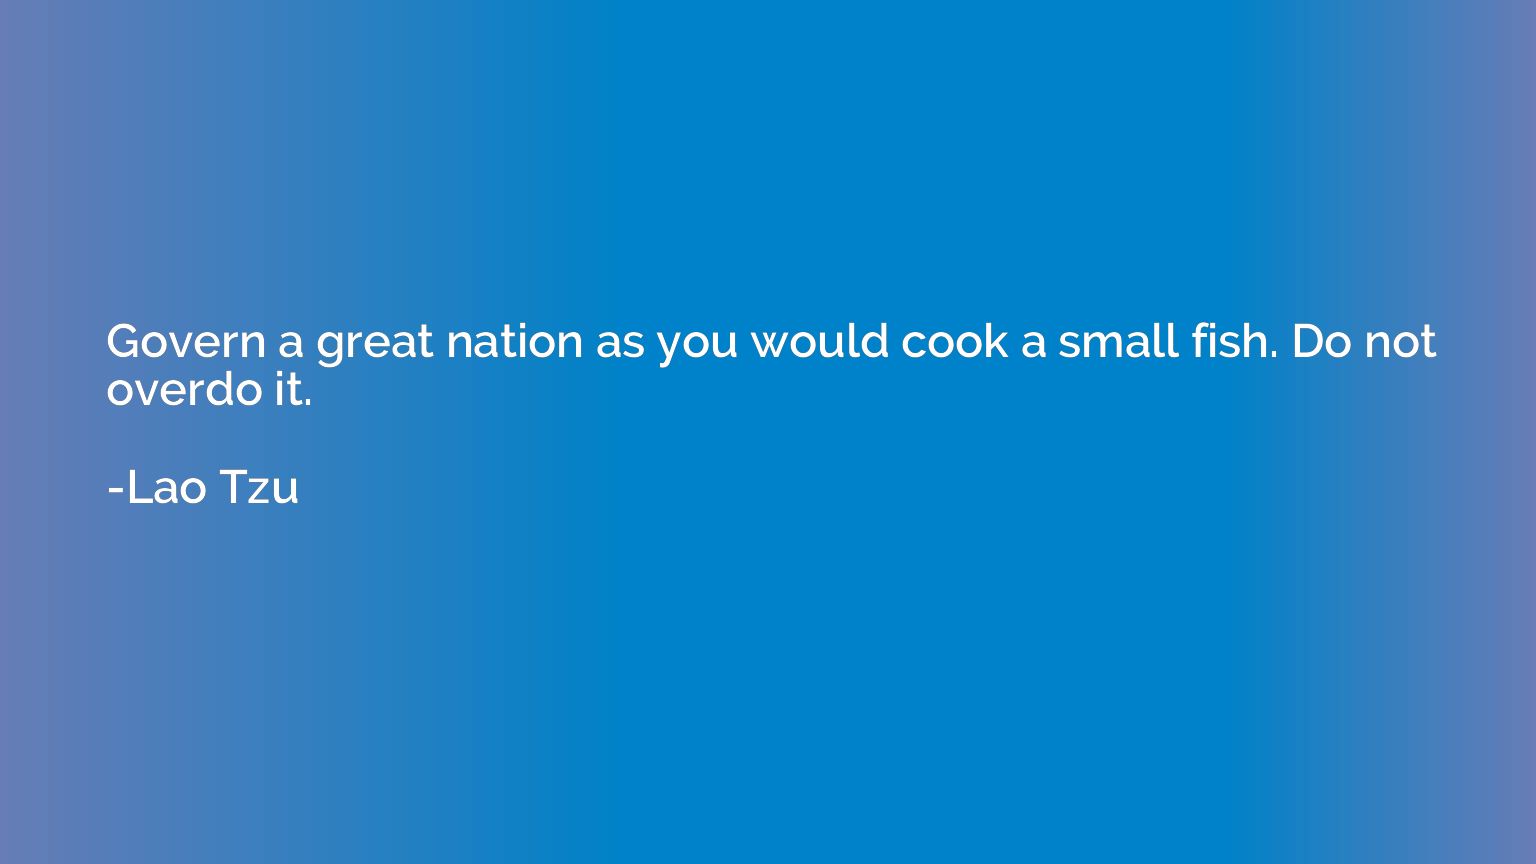 Govern a great nation as you would cook a small fish. Do not